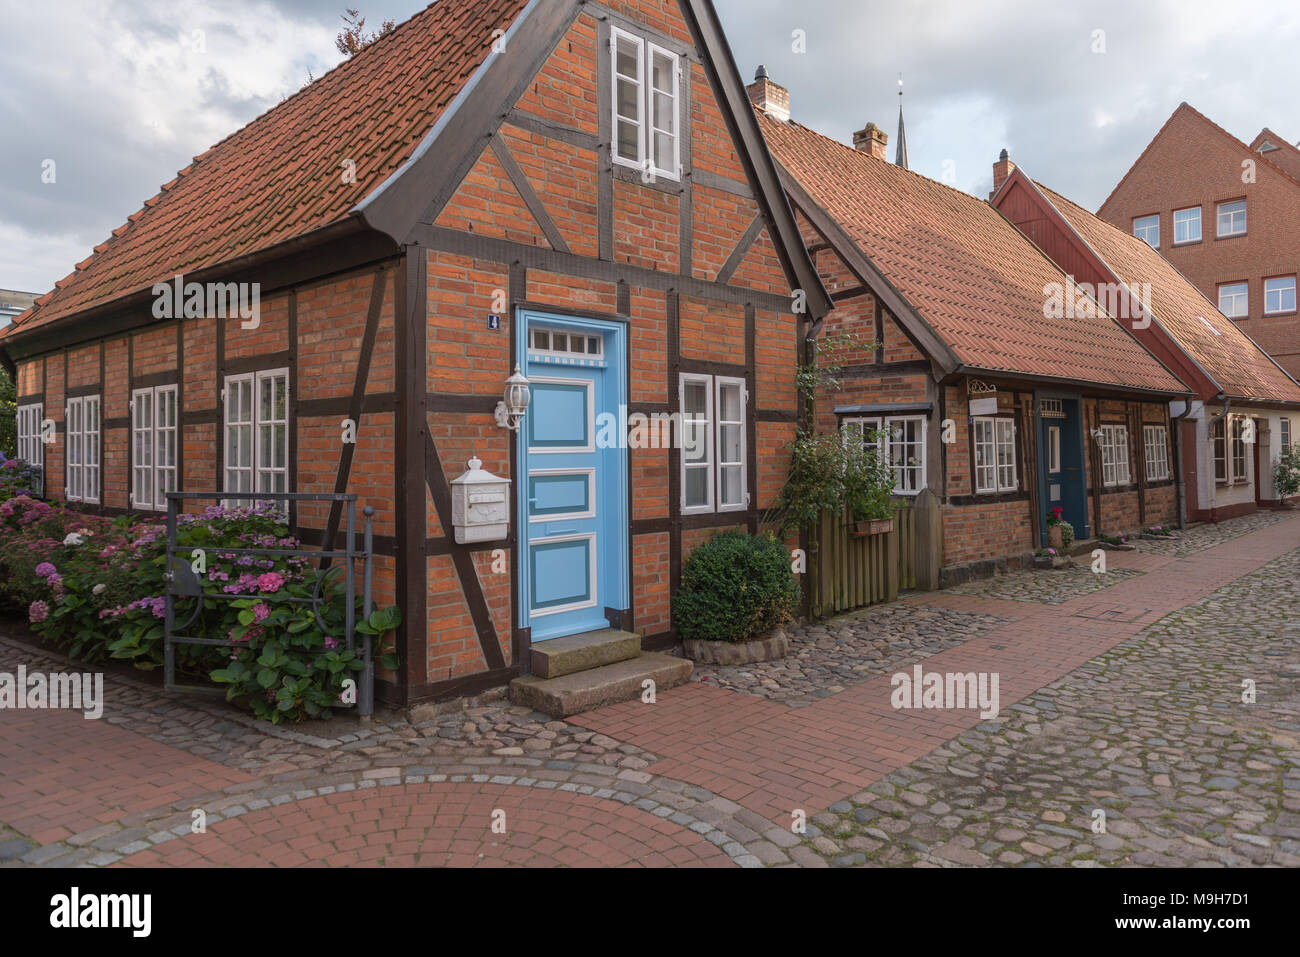 Historic centre of the town of  Bad Oldesloe, county of Storman, Schleswig-Holstein, Germany, Europe Stock Photo